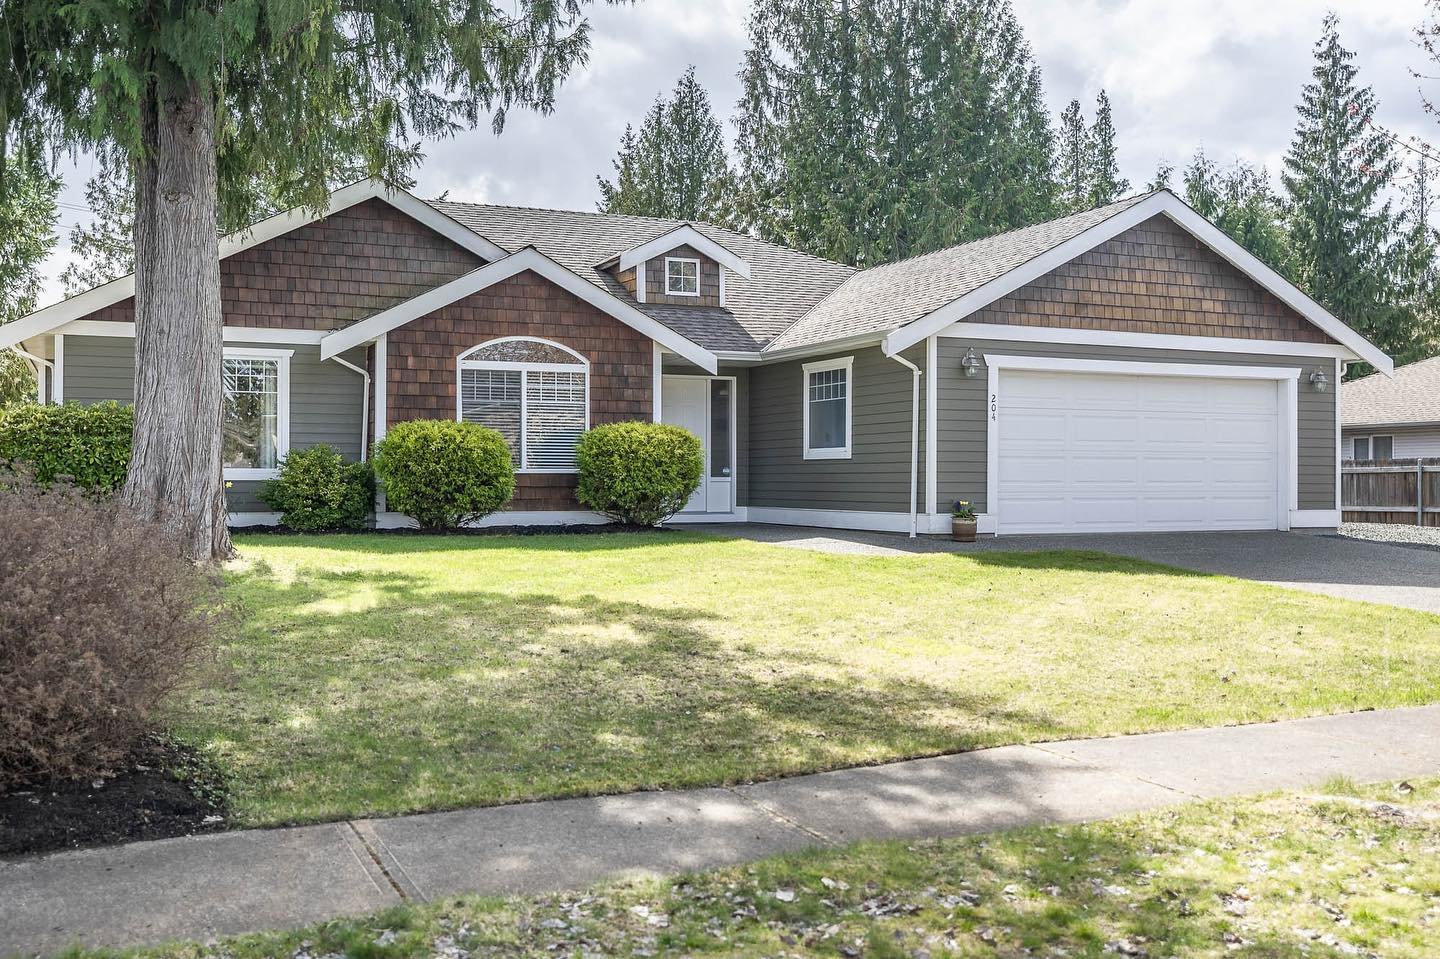 Qualicum Beach Open House Sat May 4 from 10-12 at 204 Saturna Drive in Hermitage Park